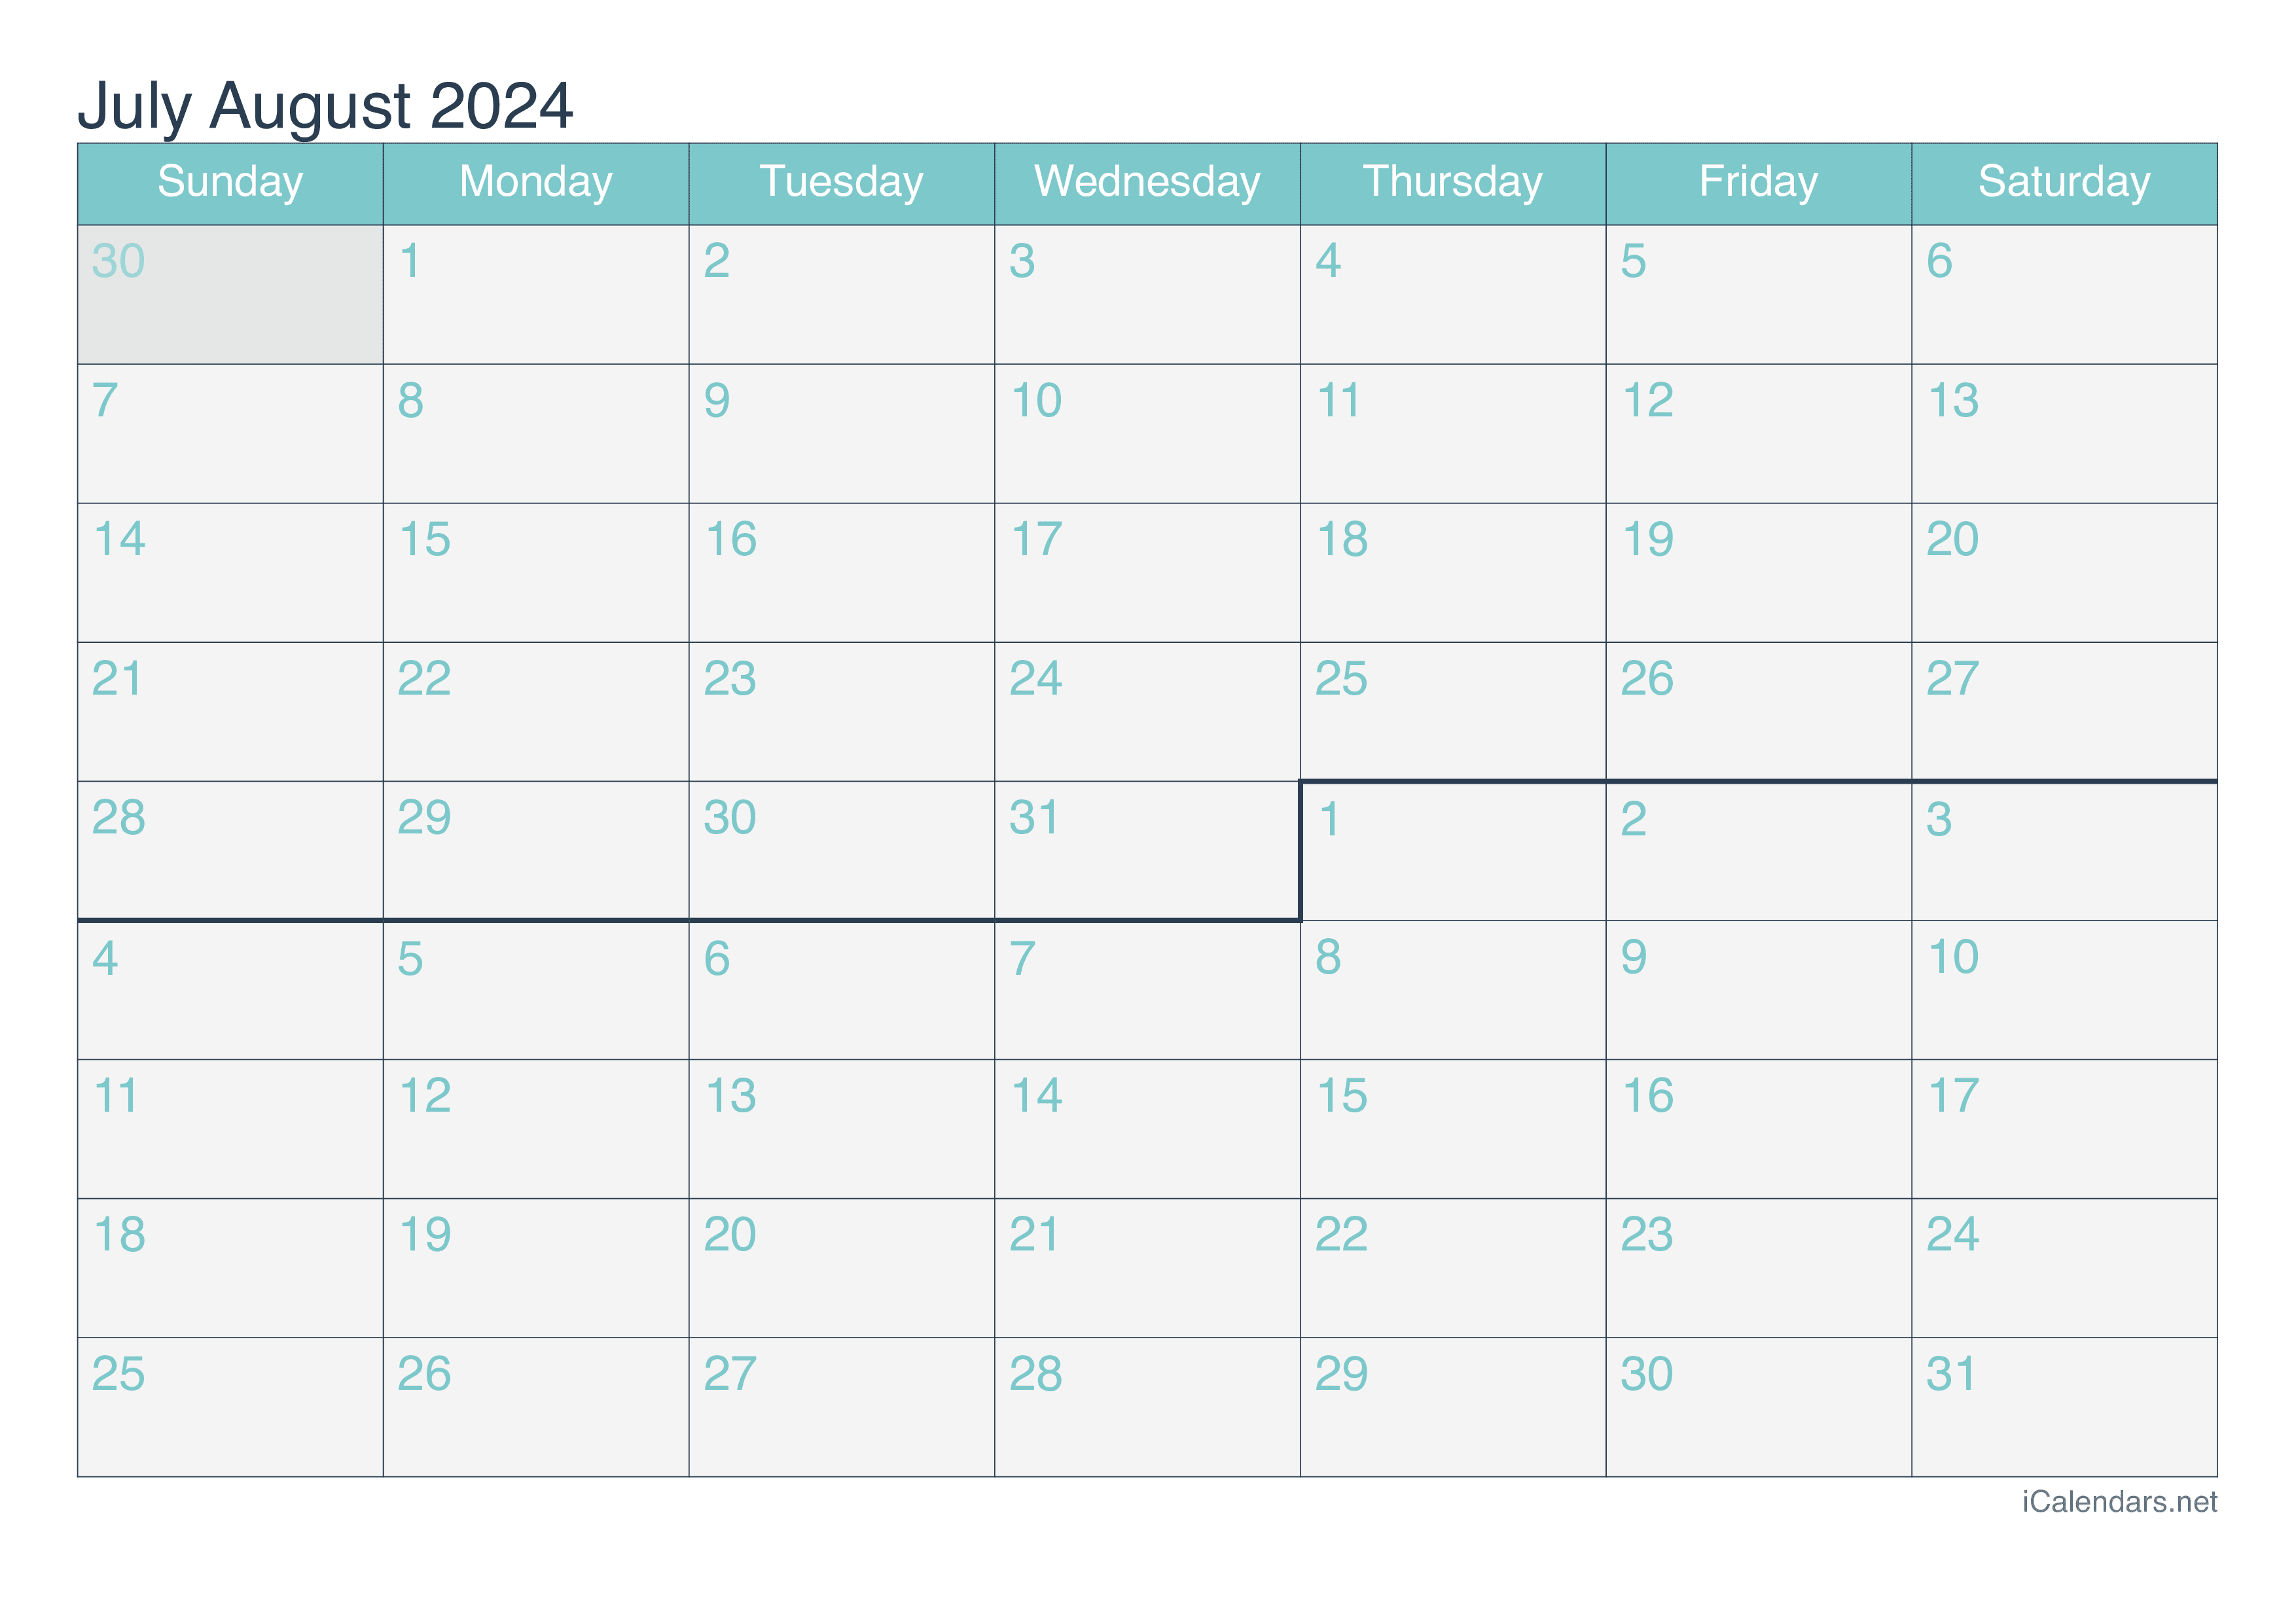 July And August 2024 Printable Calendar intended for July-August 2024 Calendar